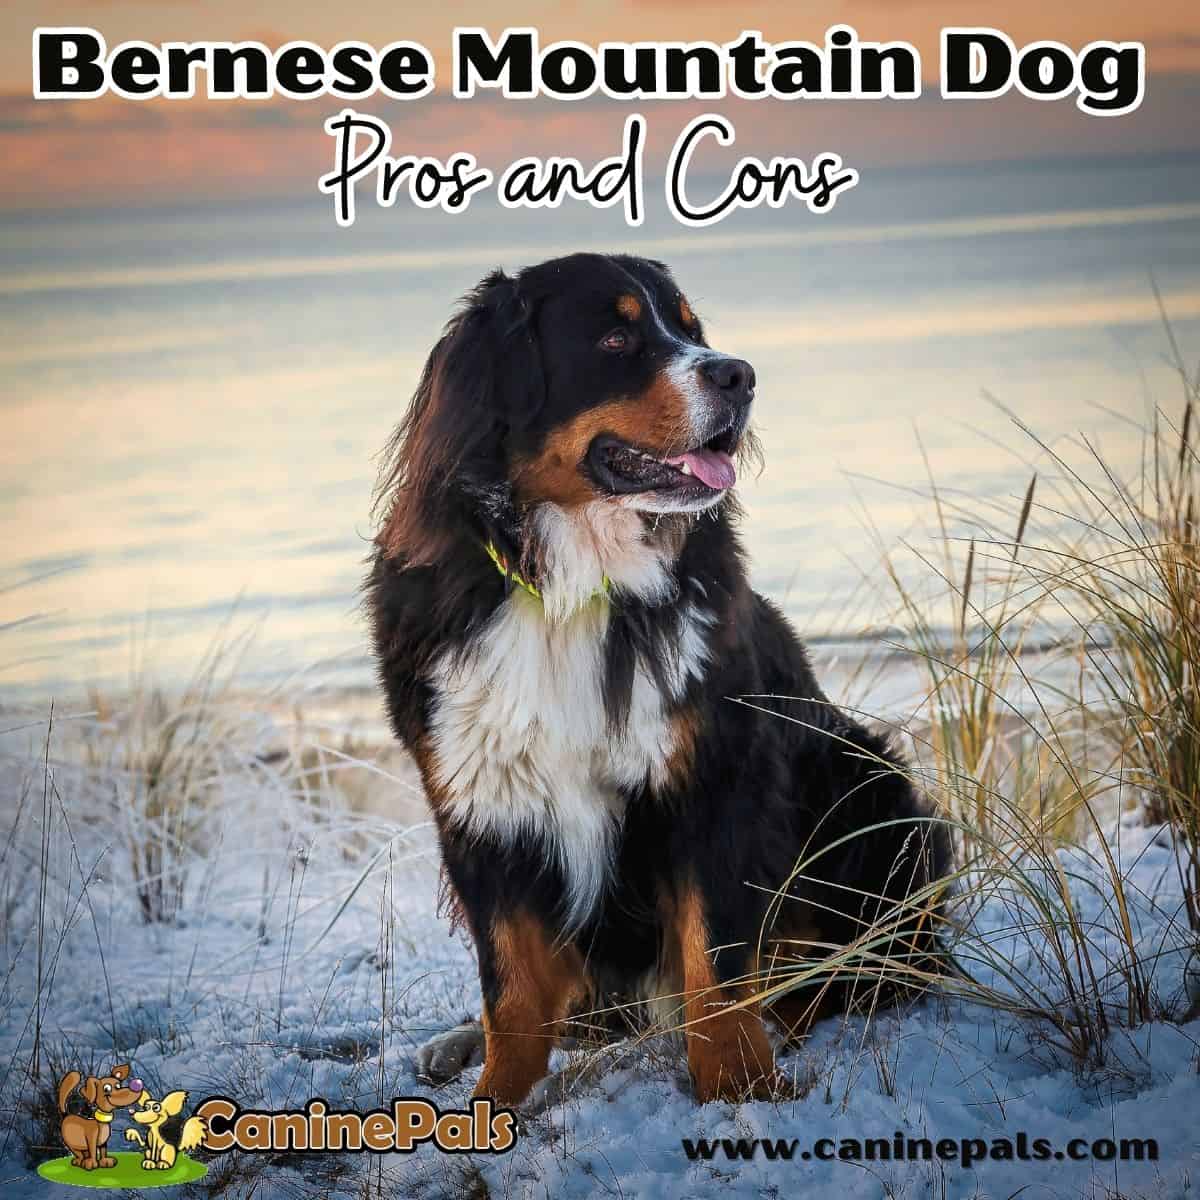 Bernese Mountain Dog Pros and Cons